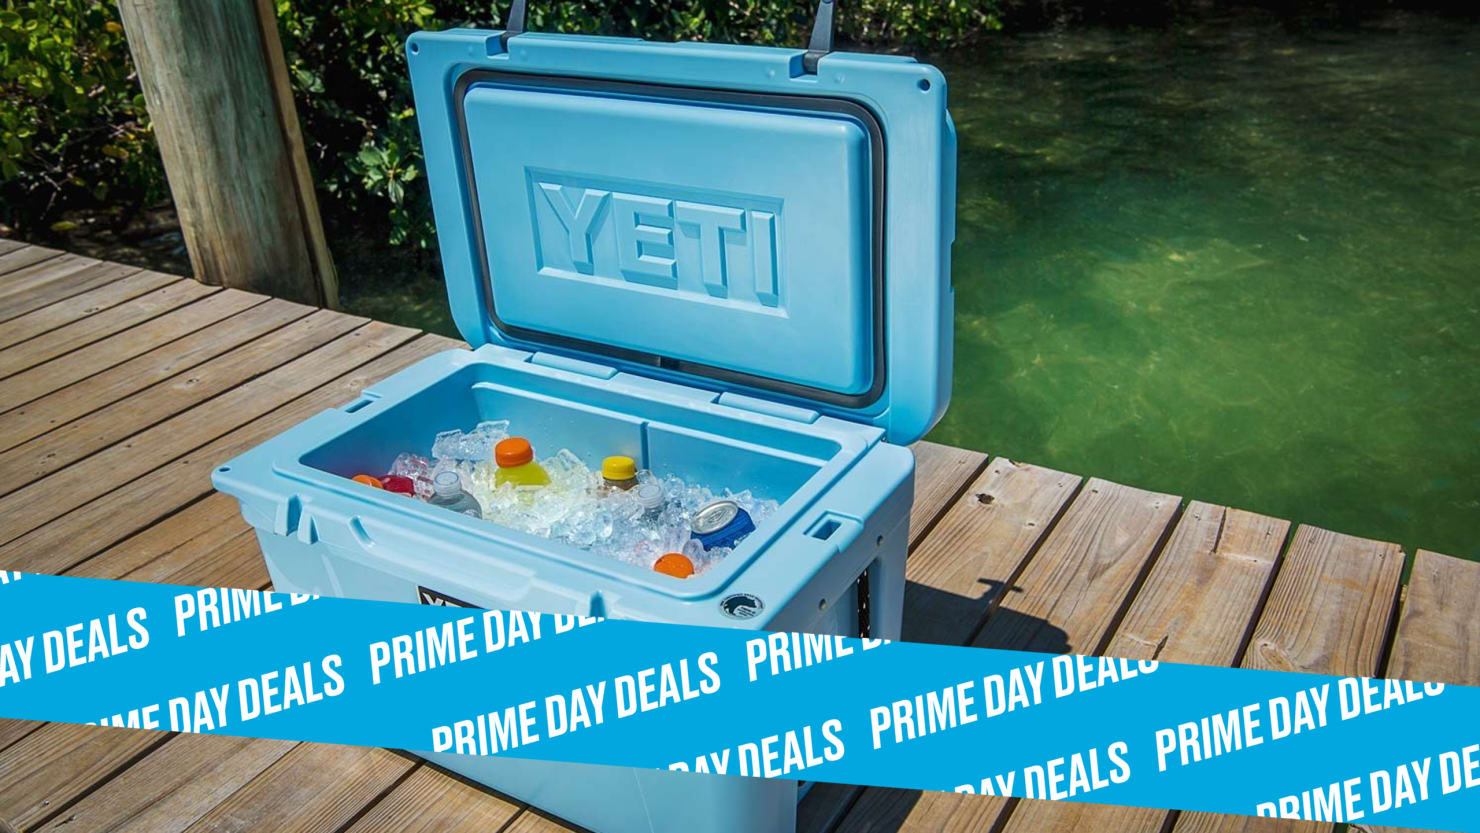 Get a New YETI Cooler for Prime Day